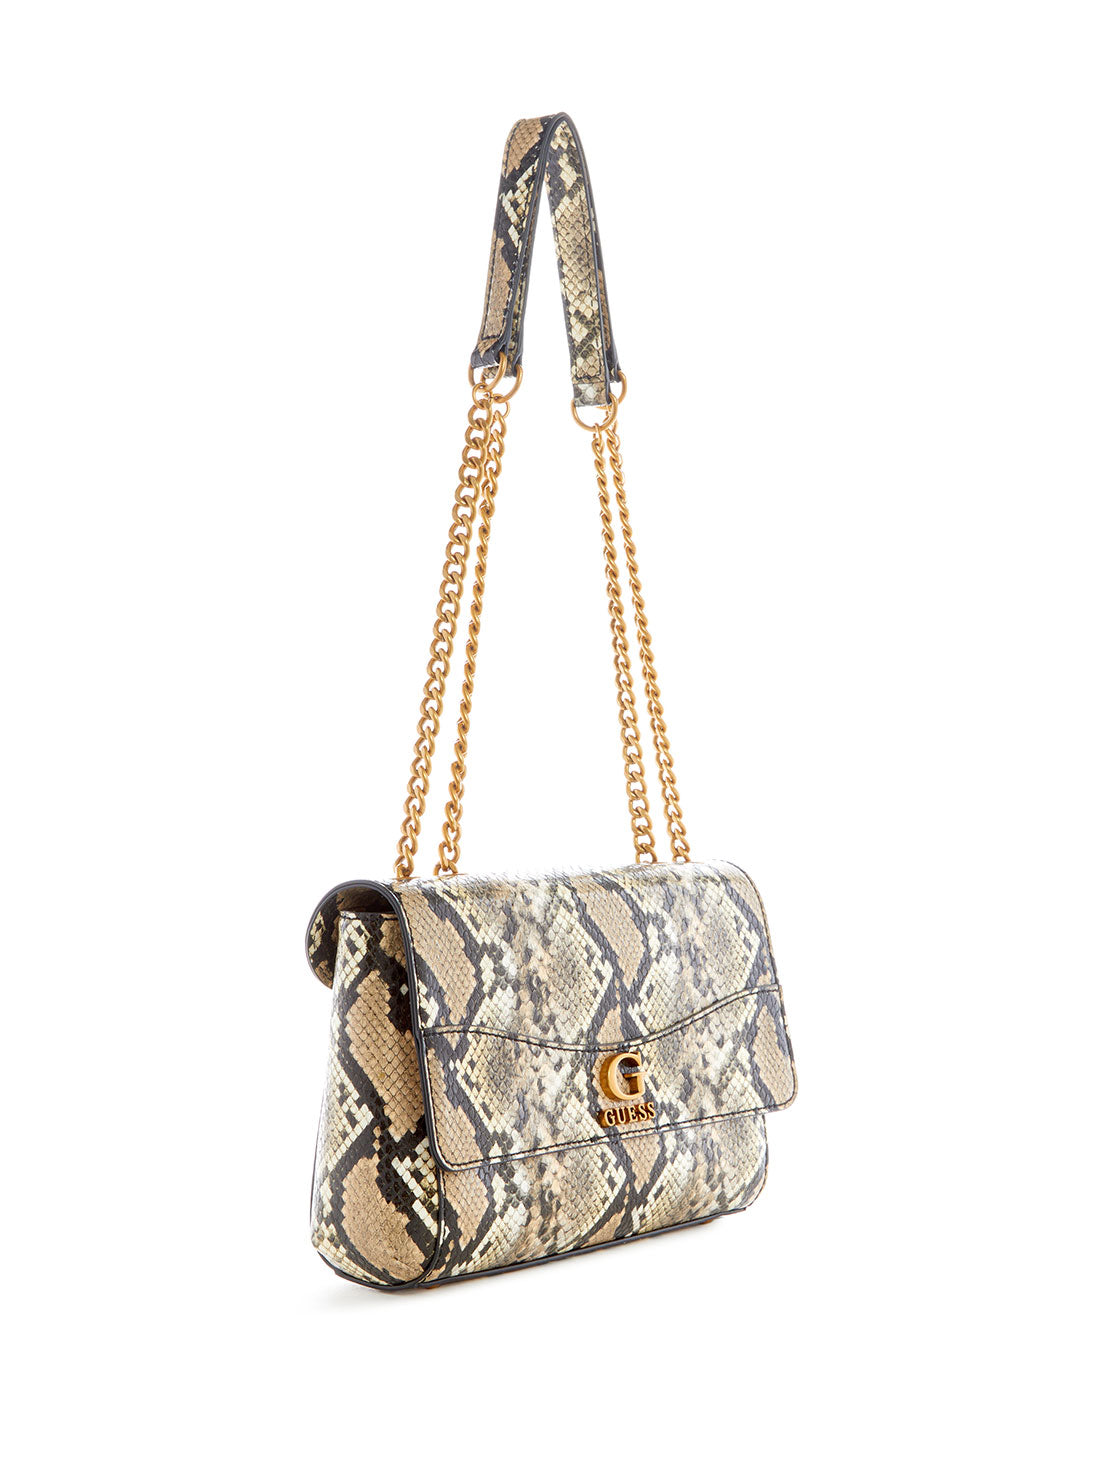 GUESS Women's Natural Python Nell Crossbody Bag KB867821 Front Side View